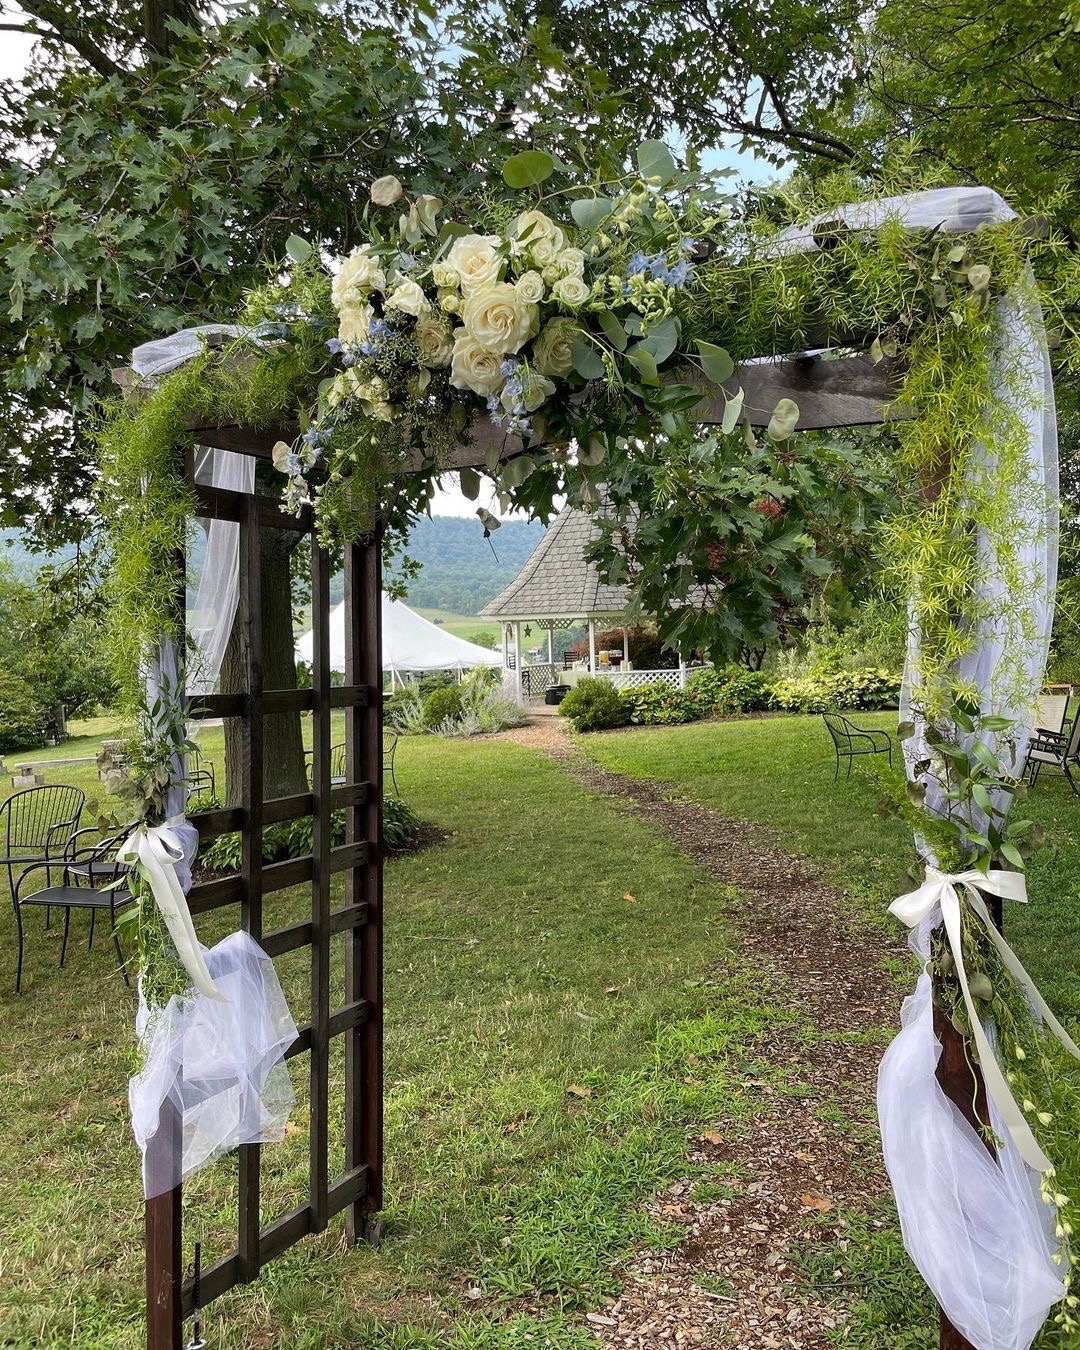 Did you know it's wedding season in Centre County? ❤️⠀
⠀
RE Farm Cafe at Windswept Farm offers a one-of-a-kind dining experience on a beautiful working farm. But do you know they also host weddings and social events! 